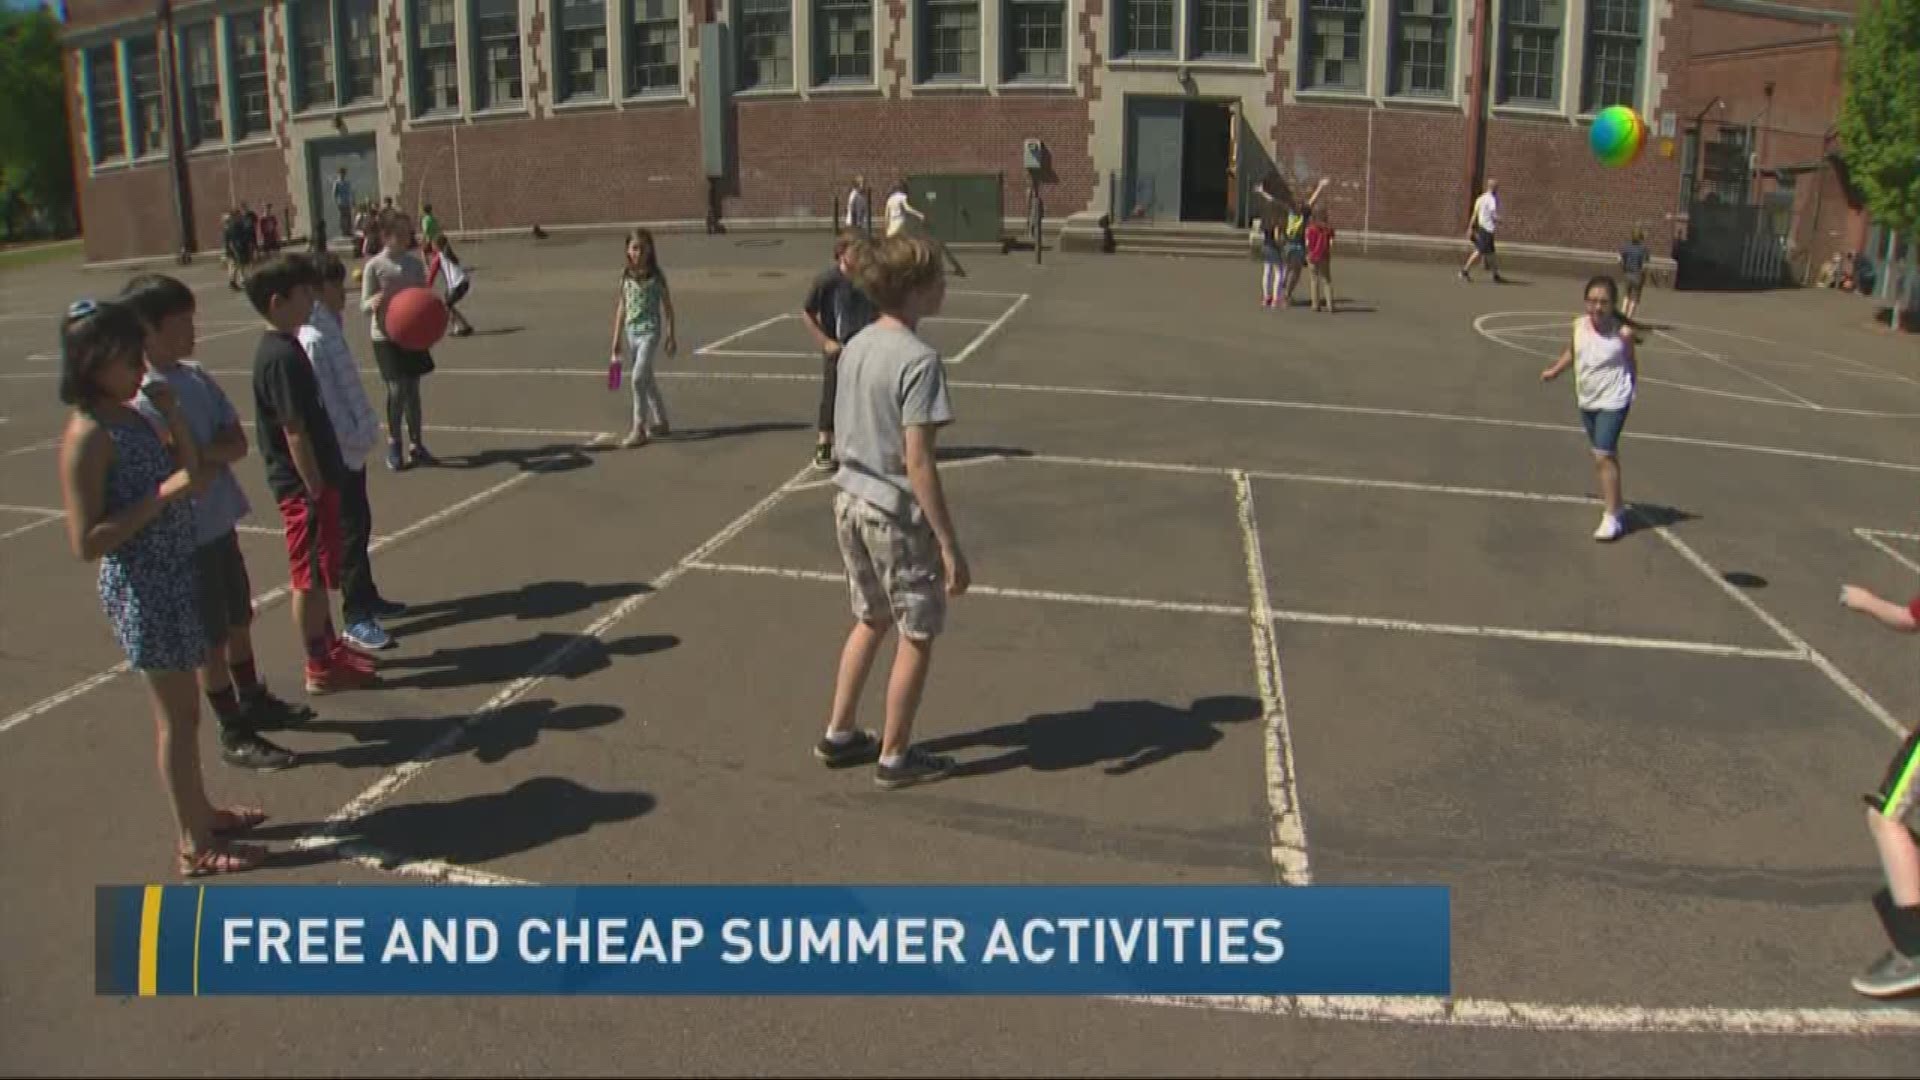 Free and cheap summer activities